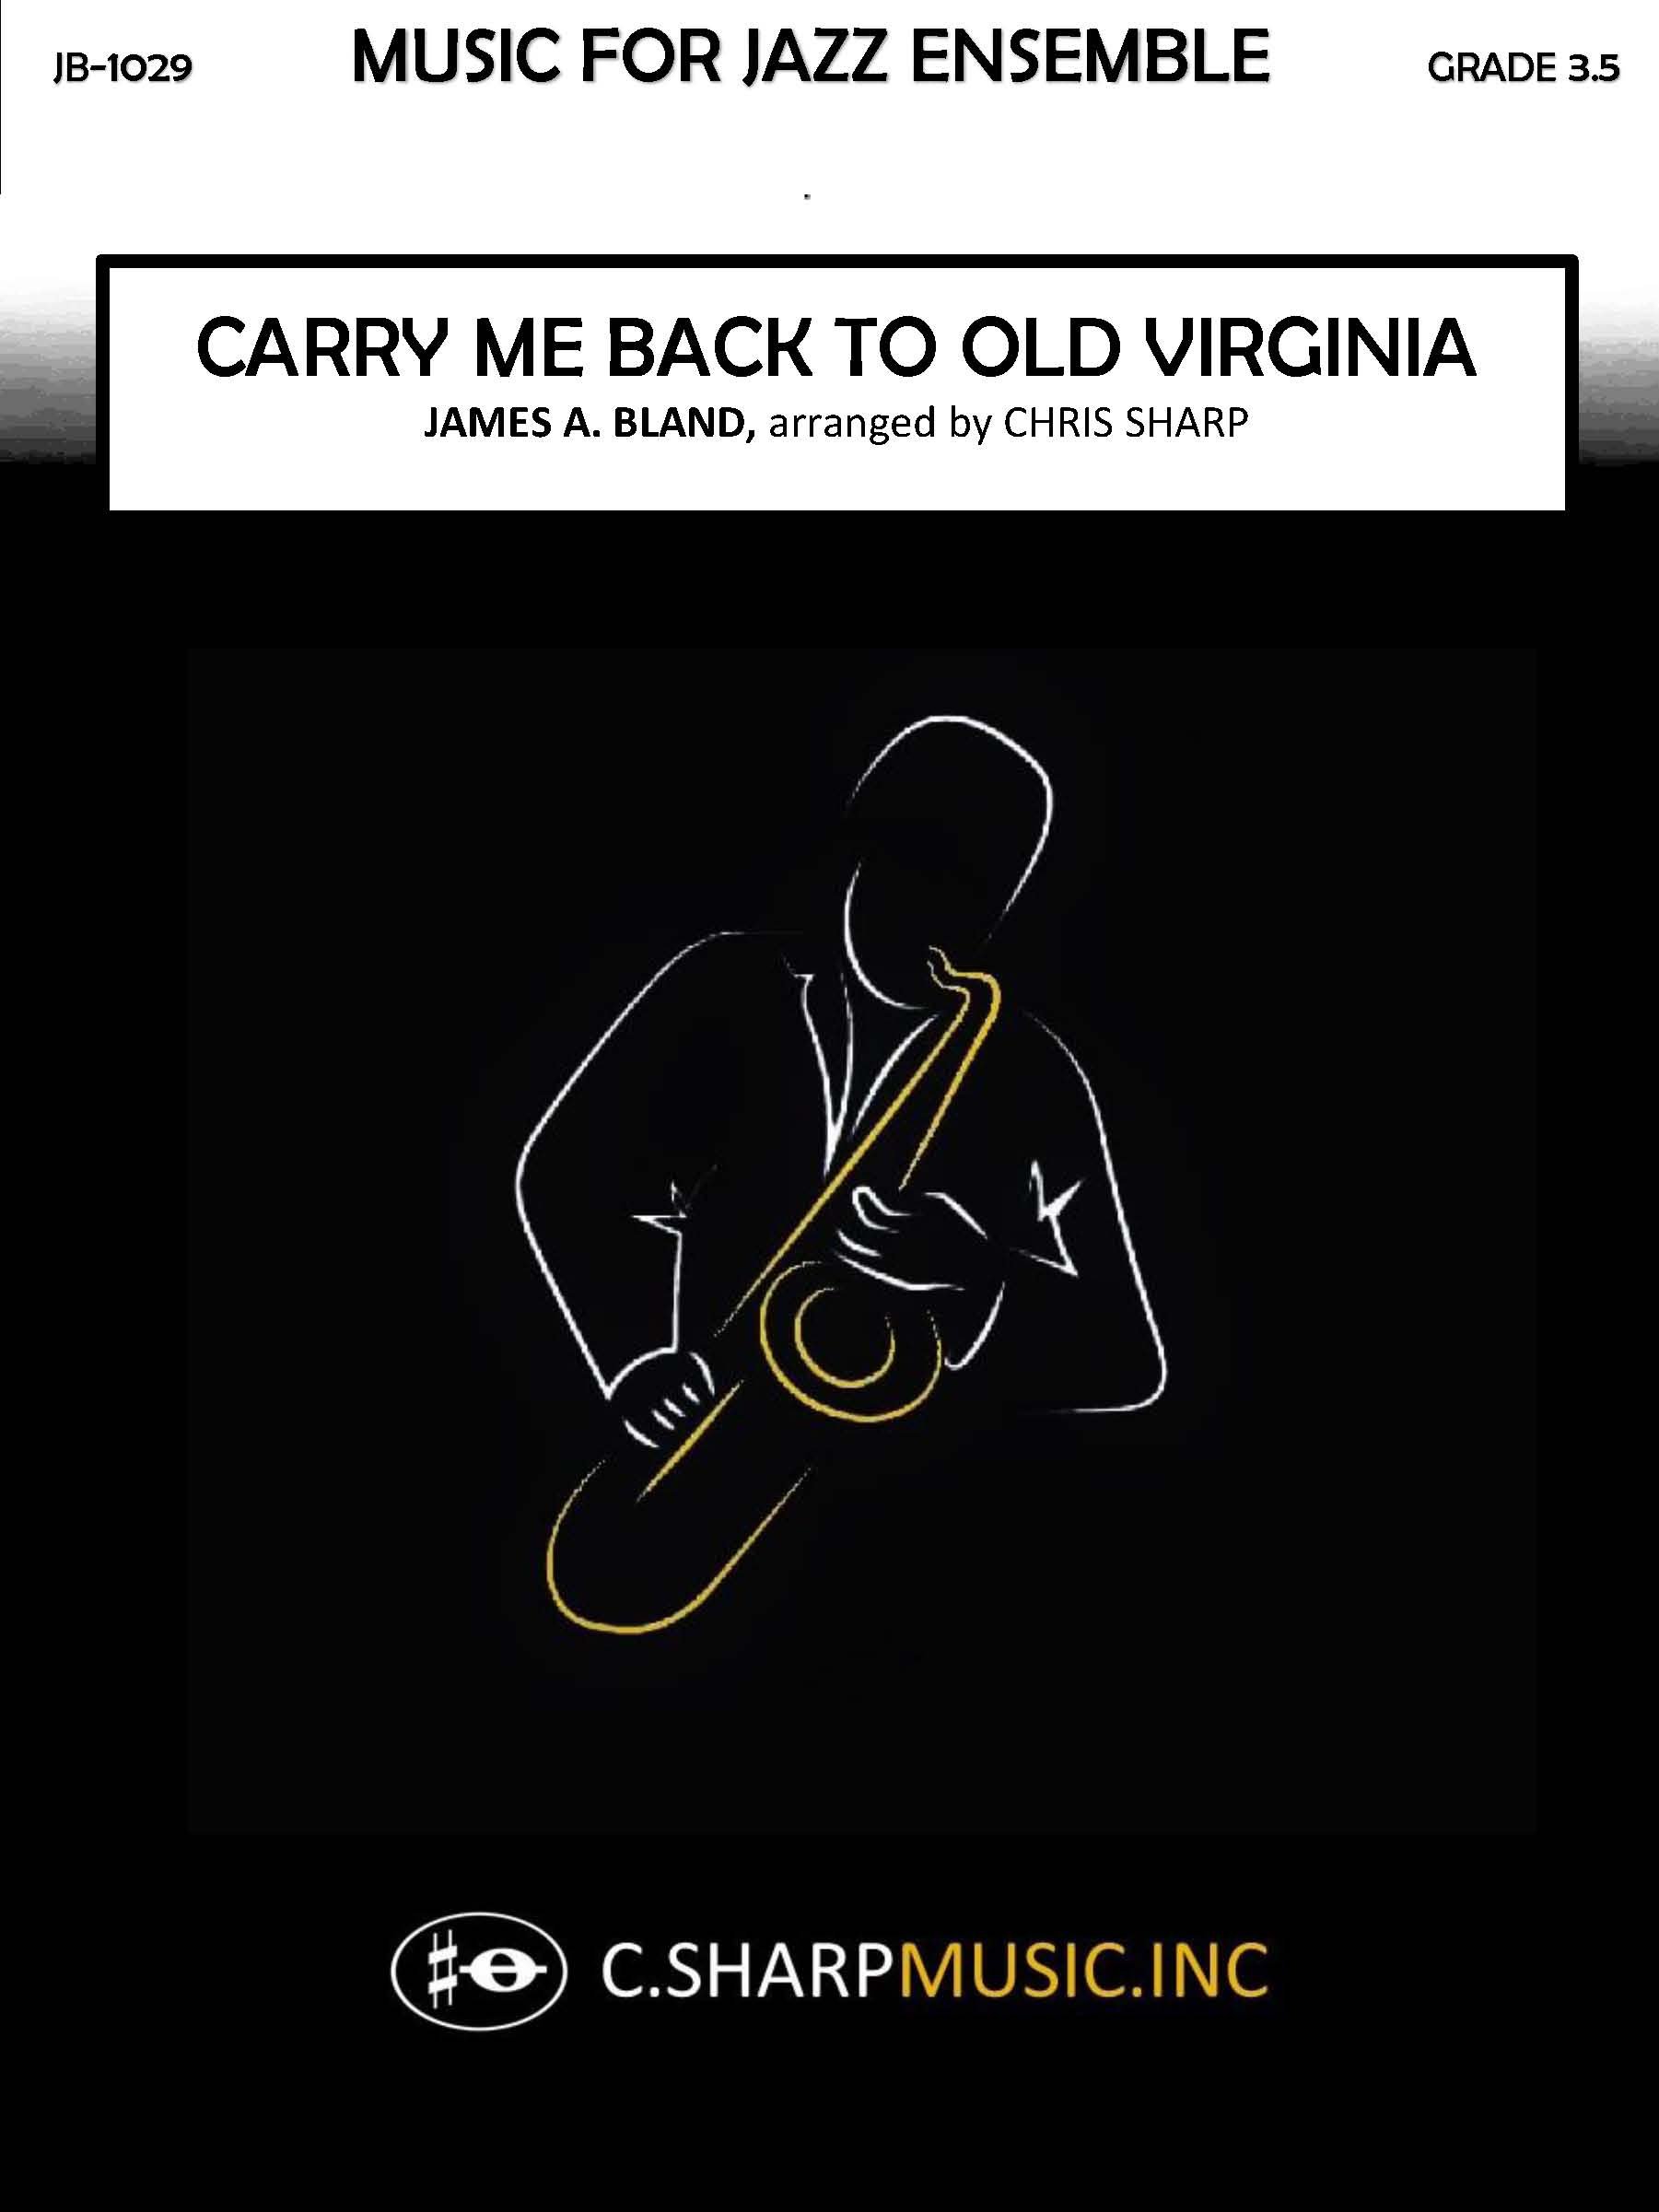 Carry Me Back to Old Virginia